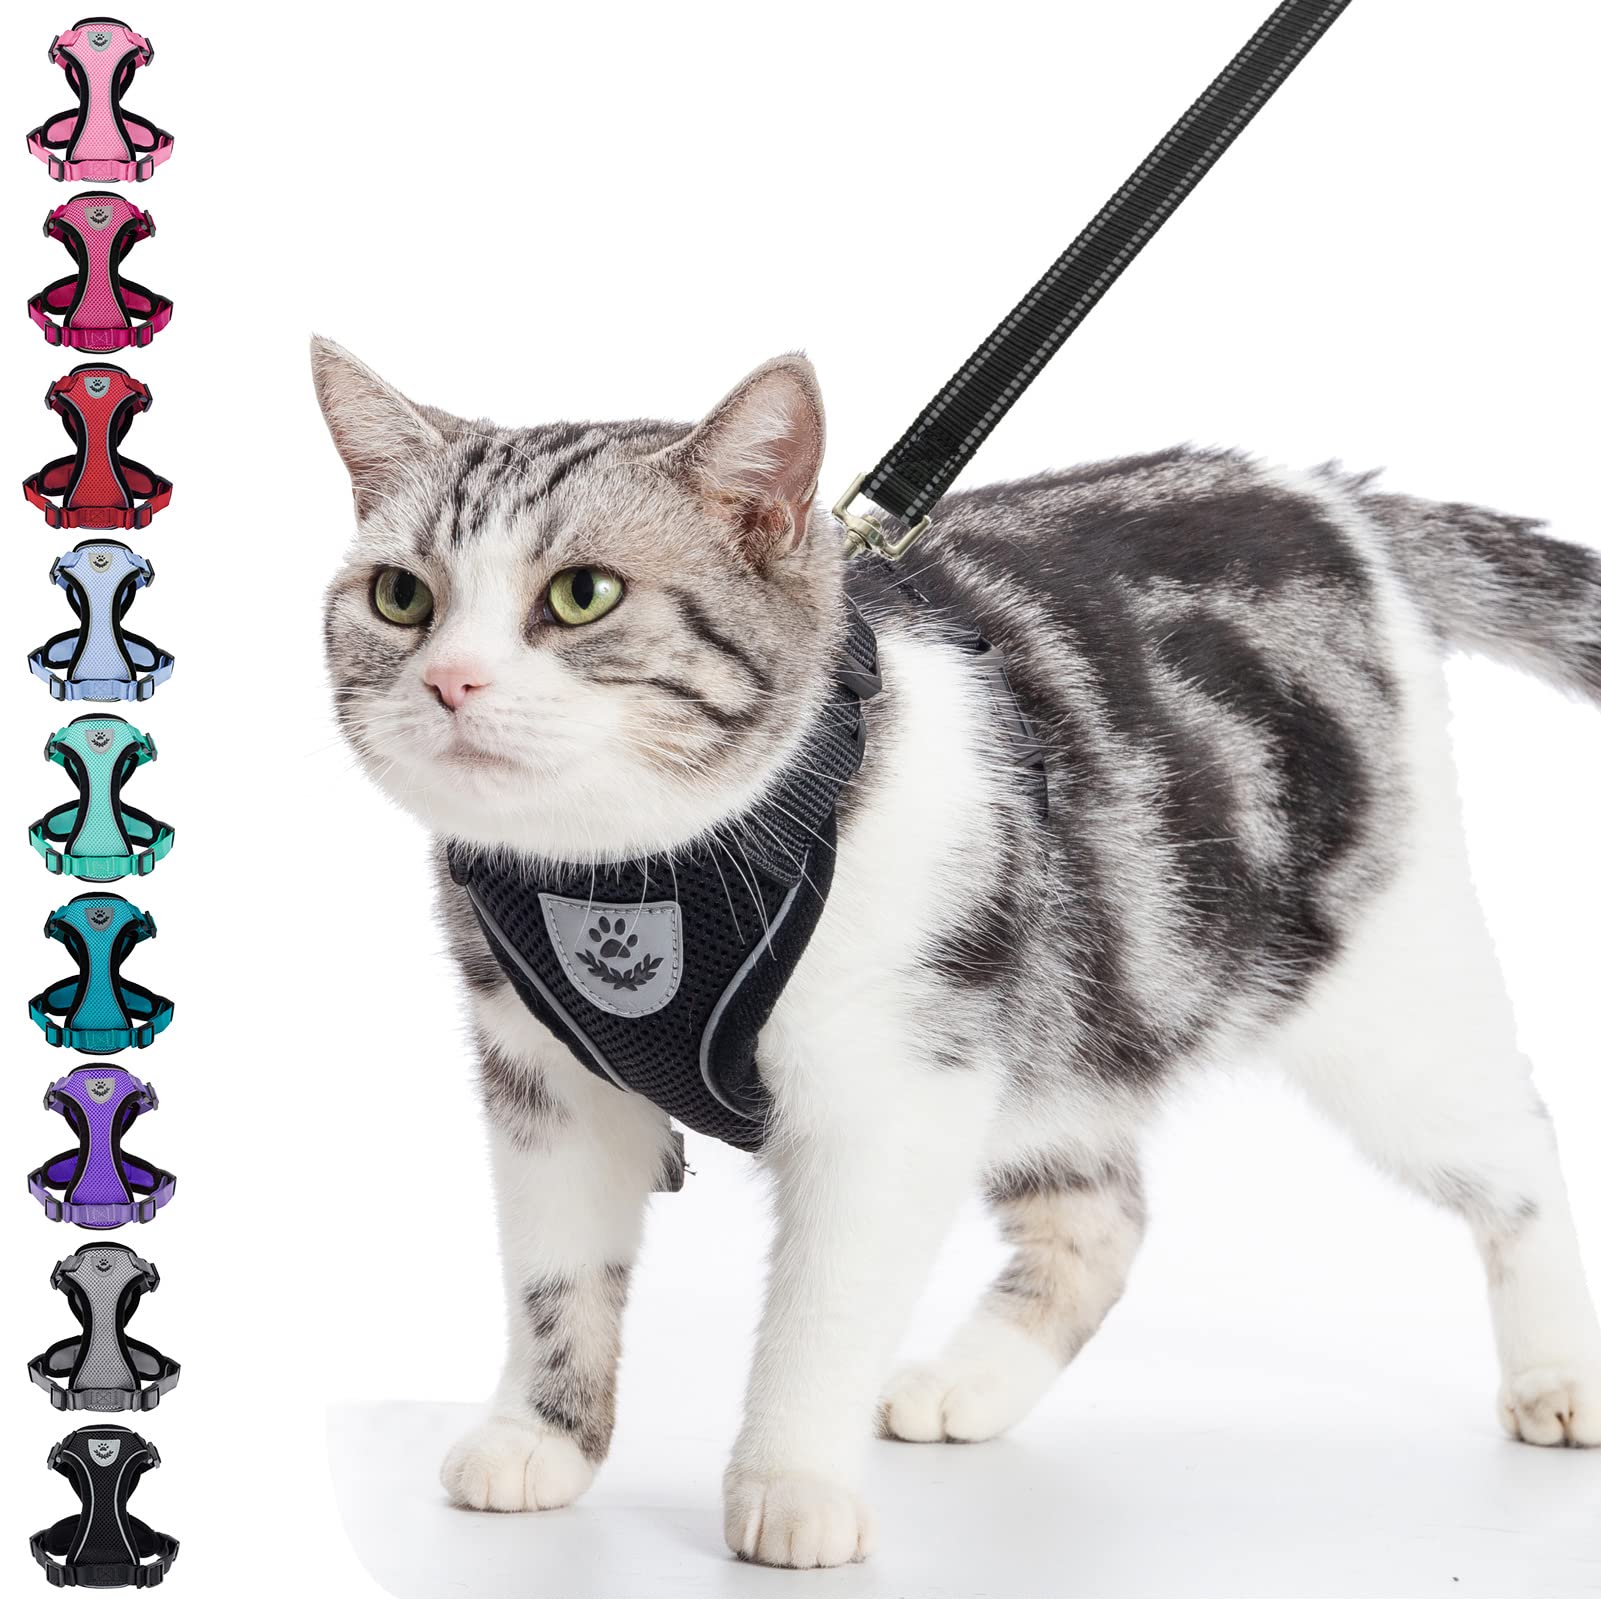 Pupteck Cat Harness And Leash Set- Adjustable Vest Escape Proof Harness For Kitten Small Medium Cats, Retractable Breathable Sof